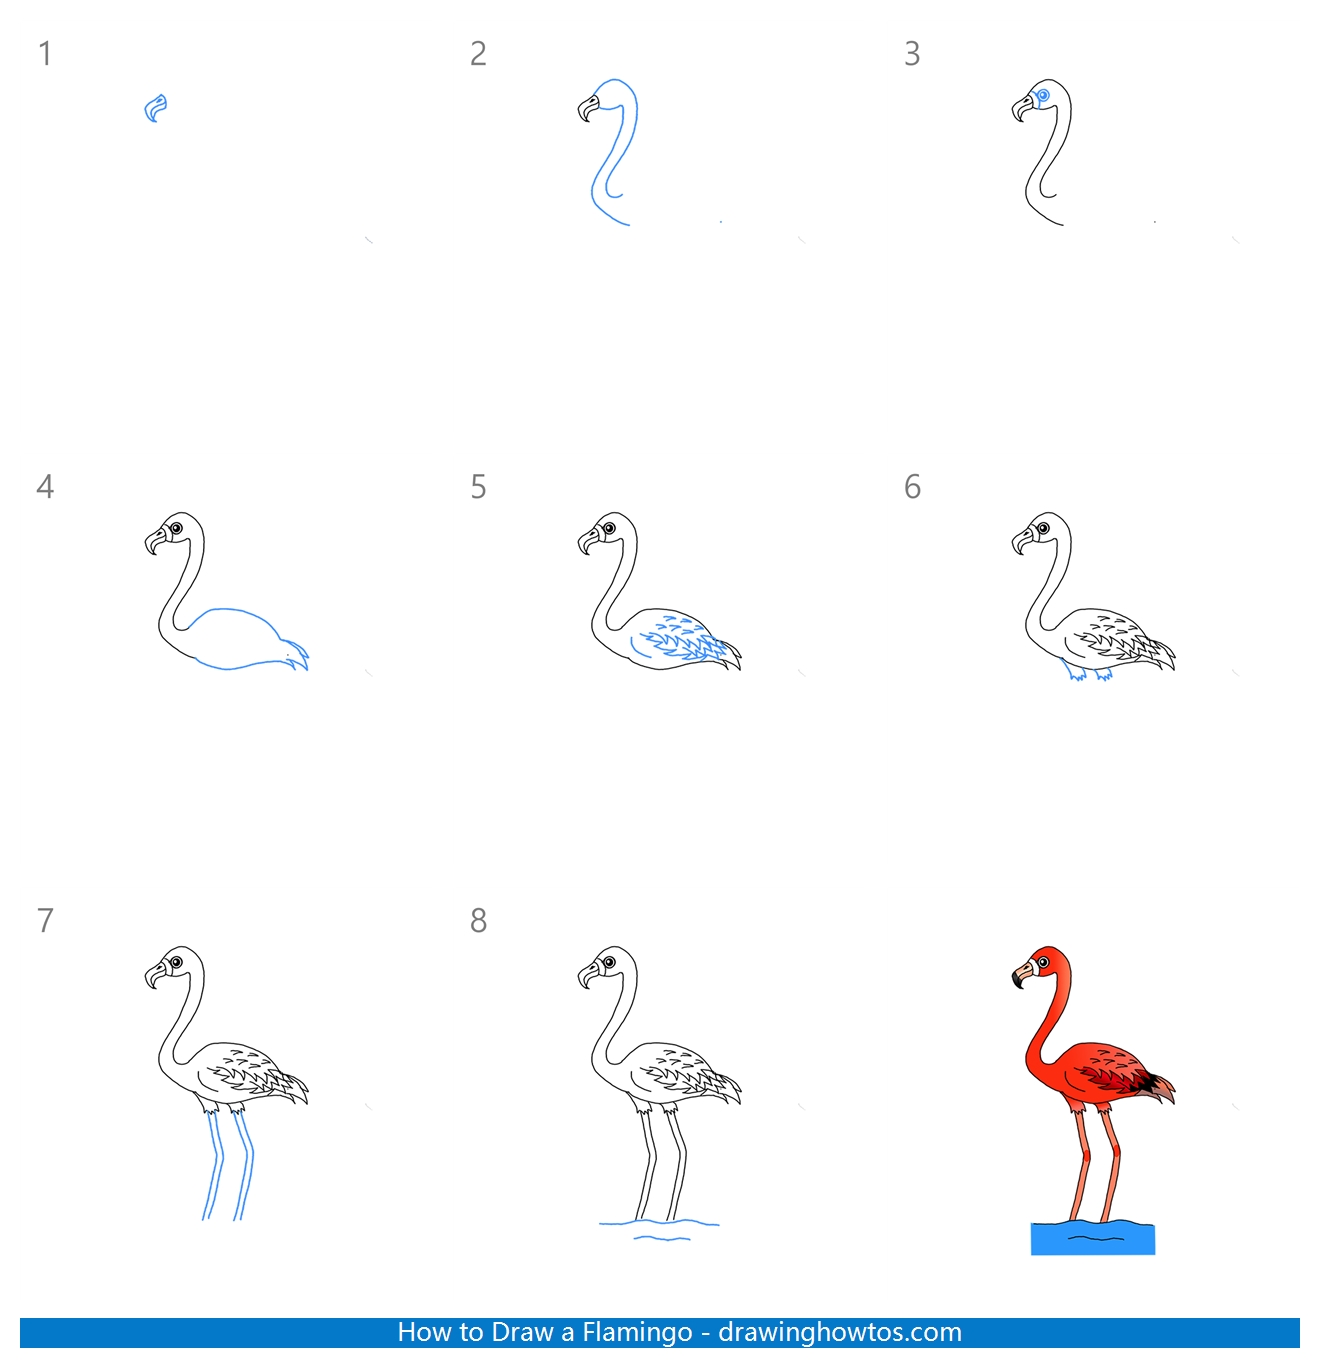 How to Draw a Flamingo Step by Step